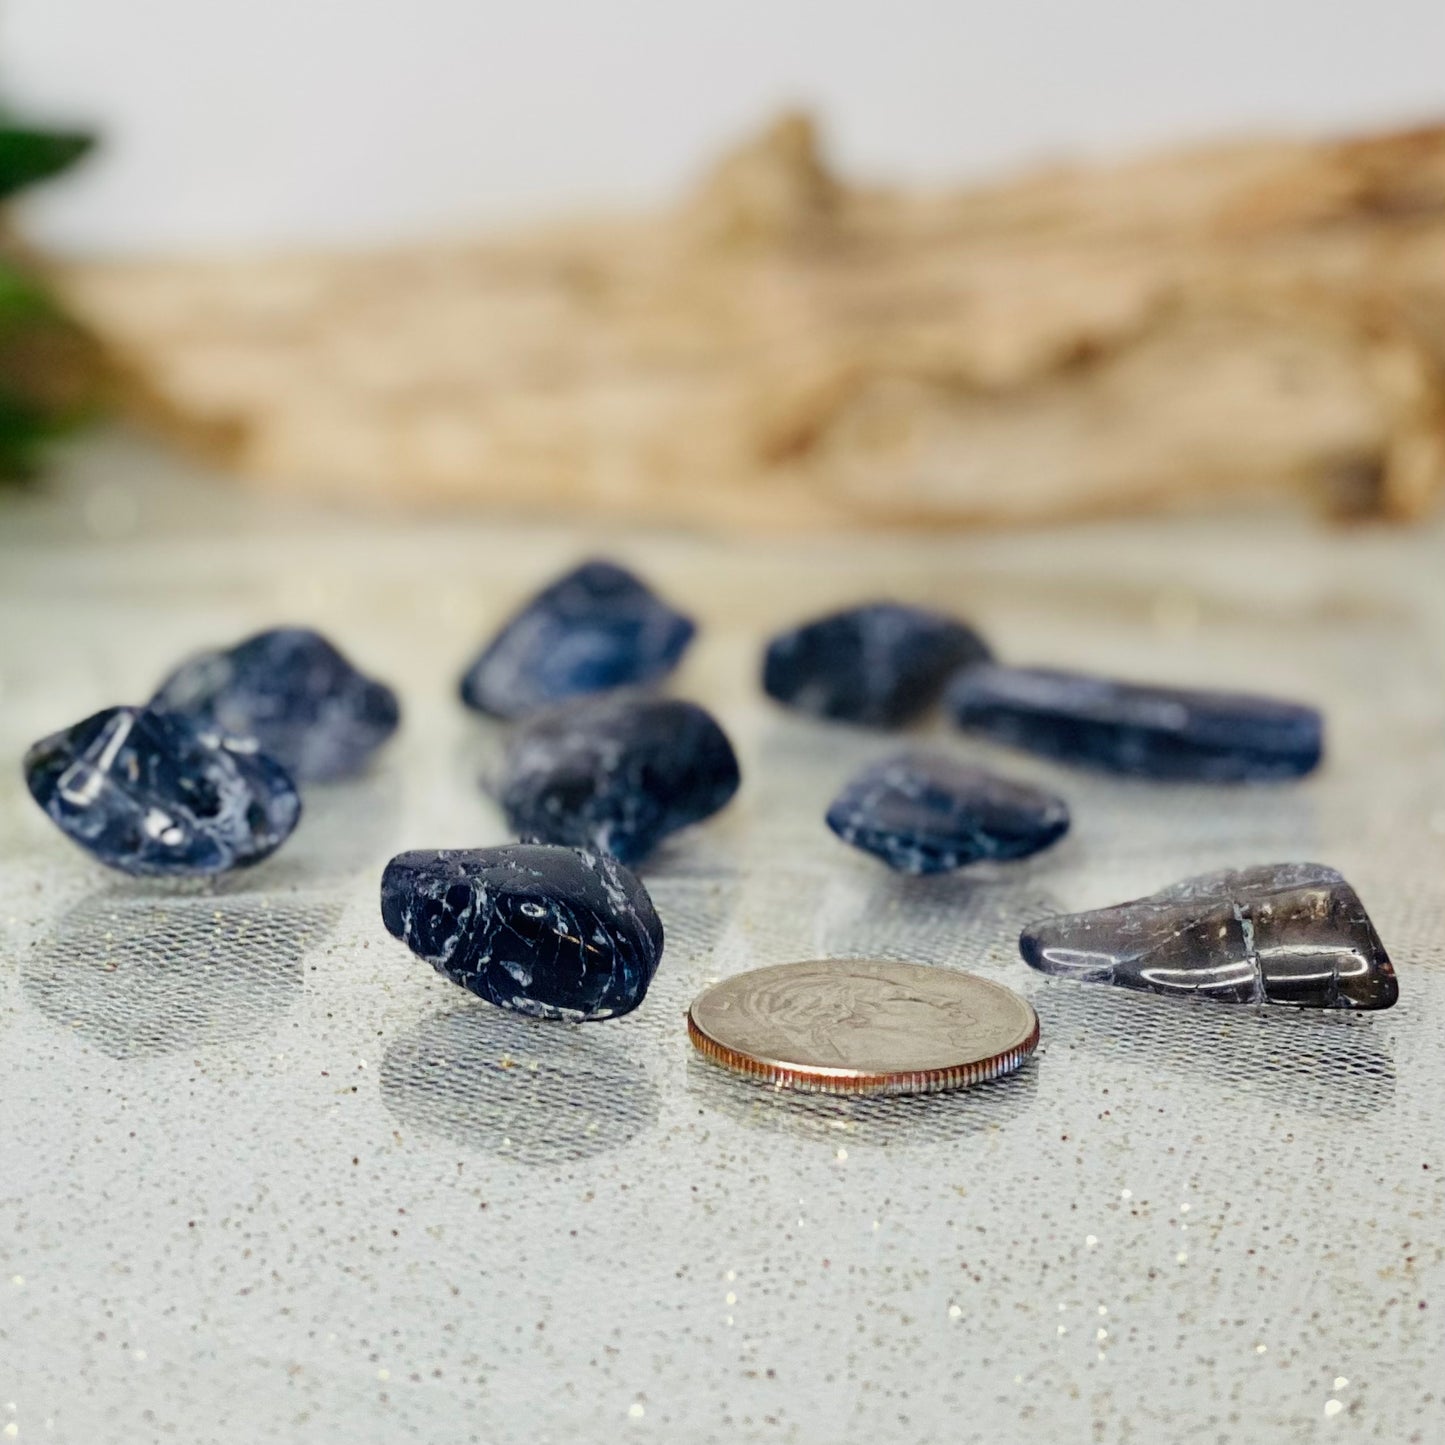 Iolite Tumbled Crystals: Tap into Your Inner Wisdom and Intuition